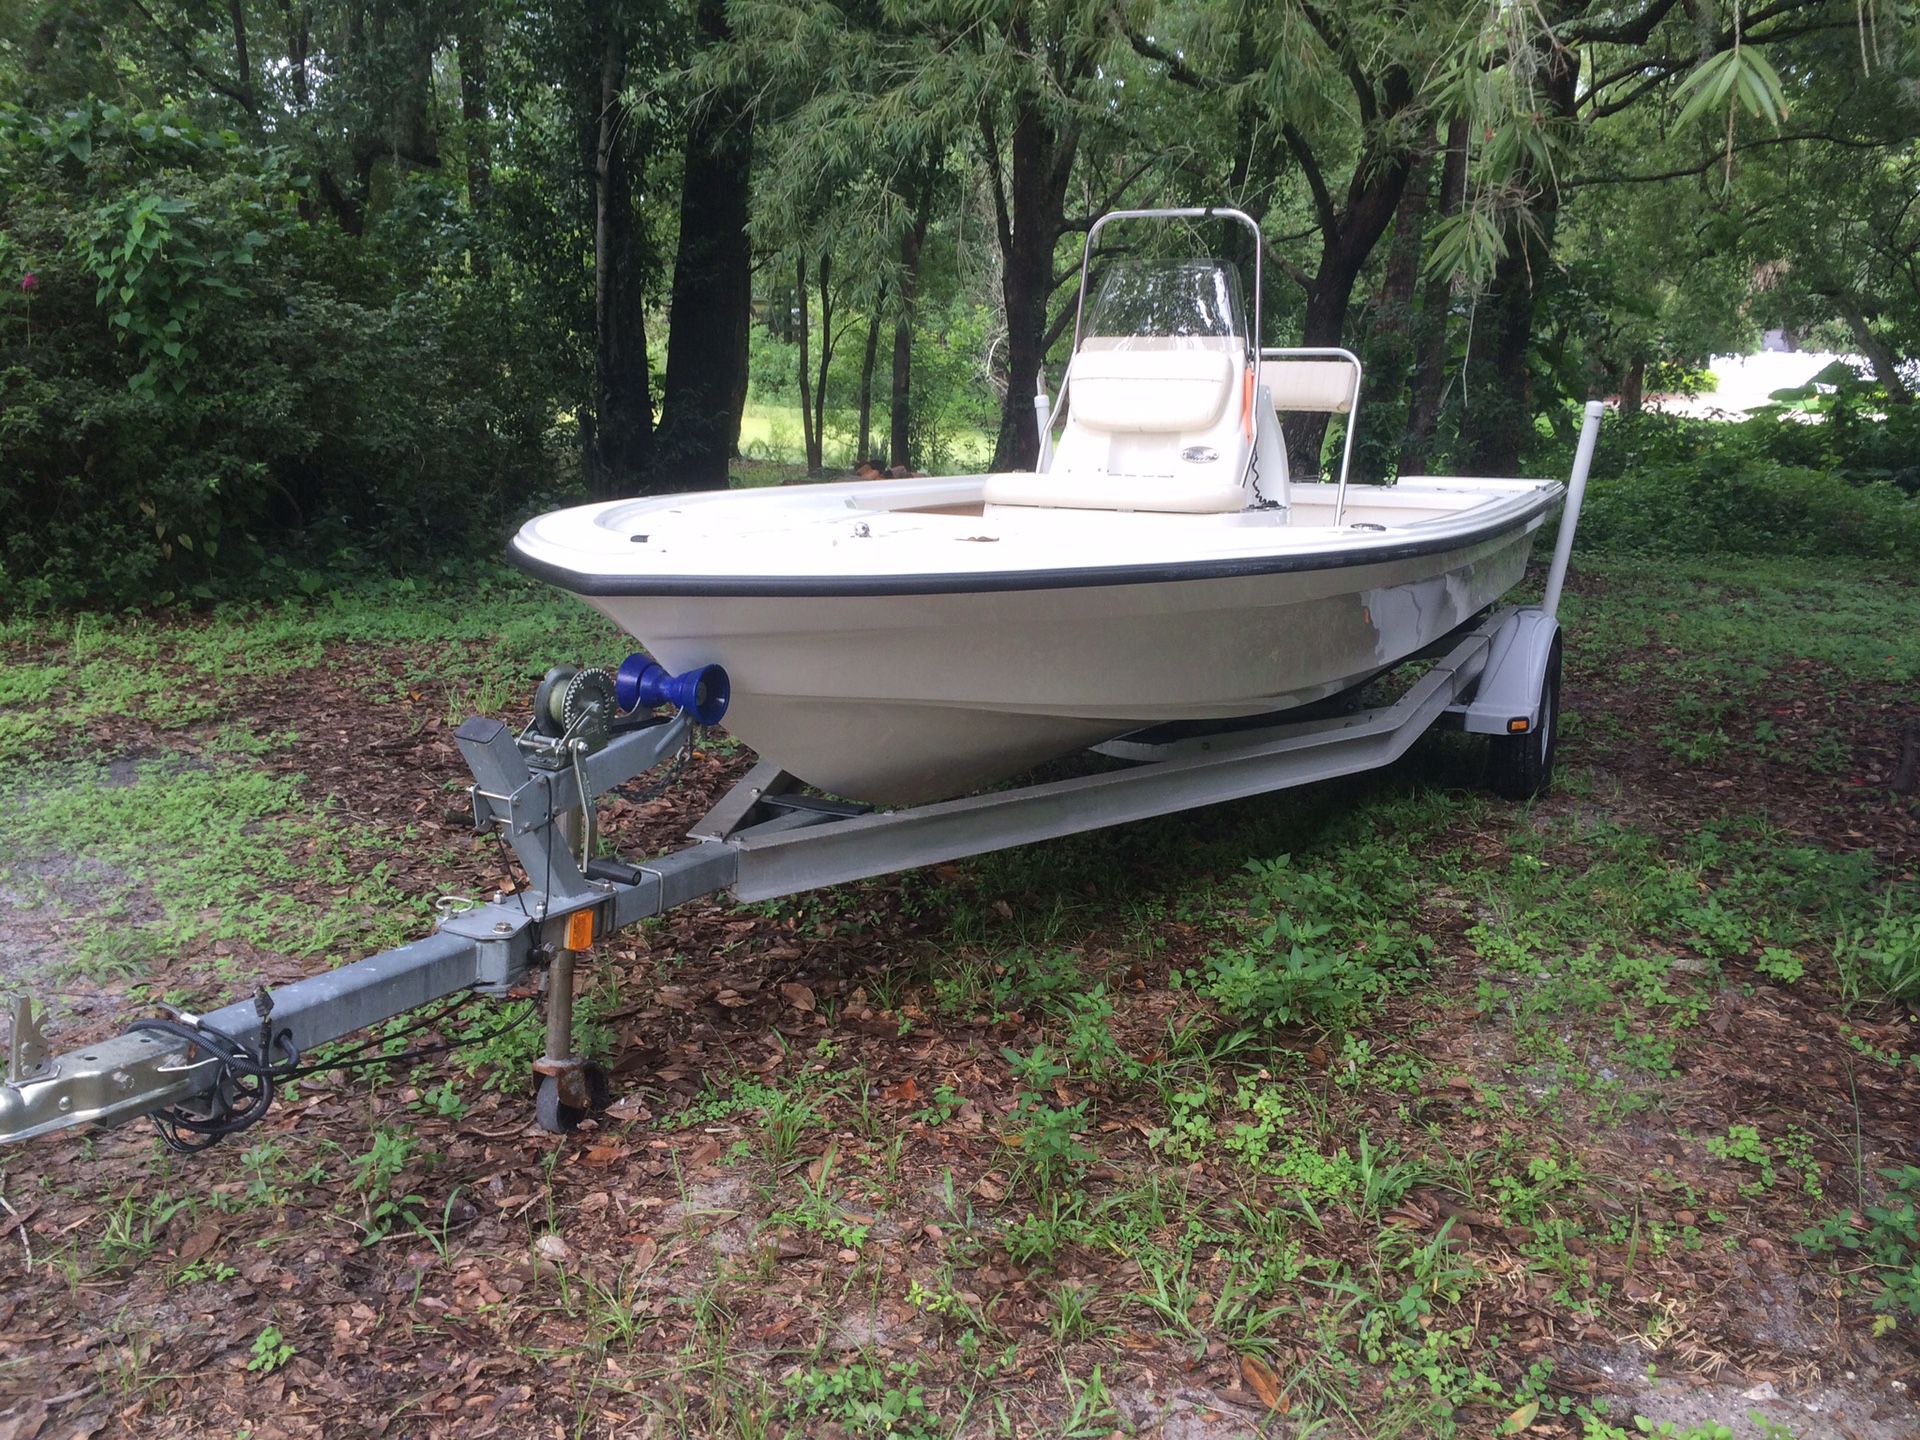 Mako 18 foot center console boat with trailer